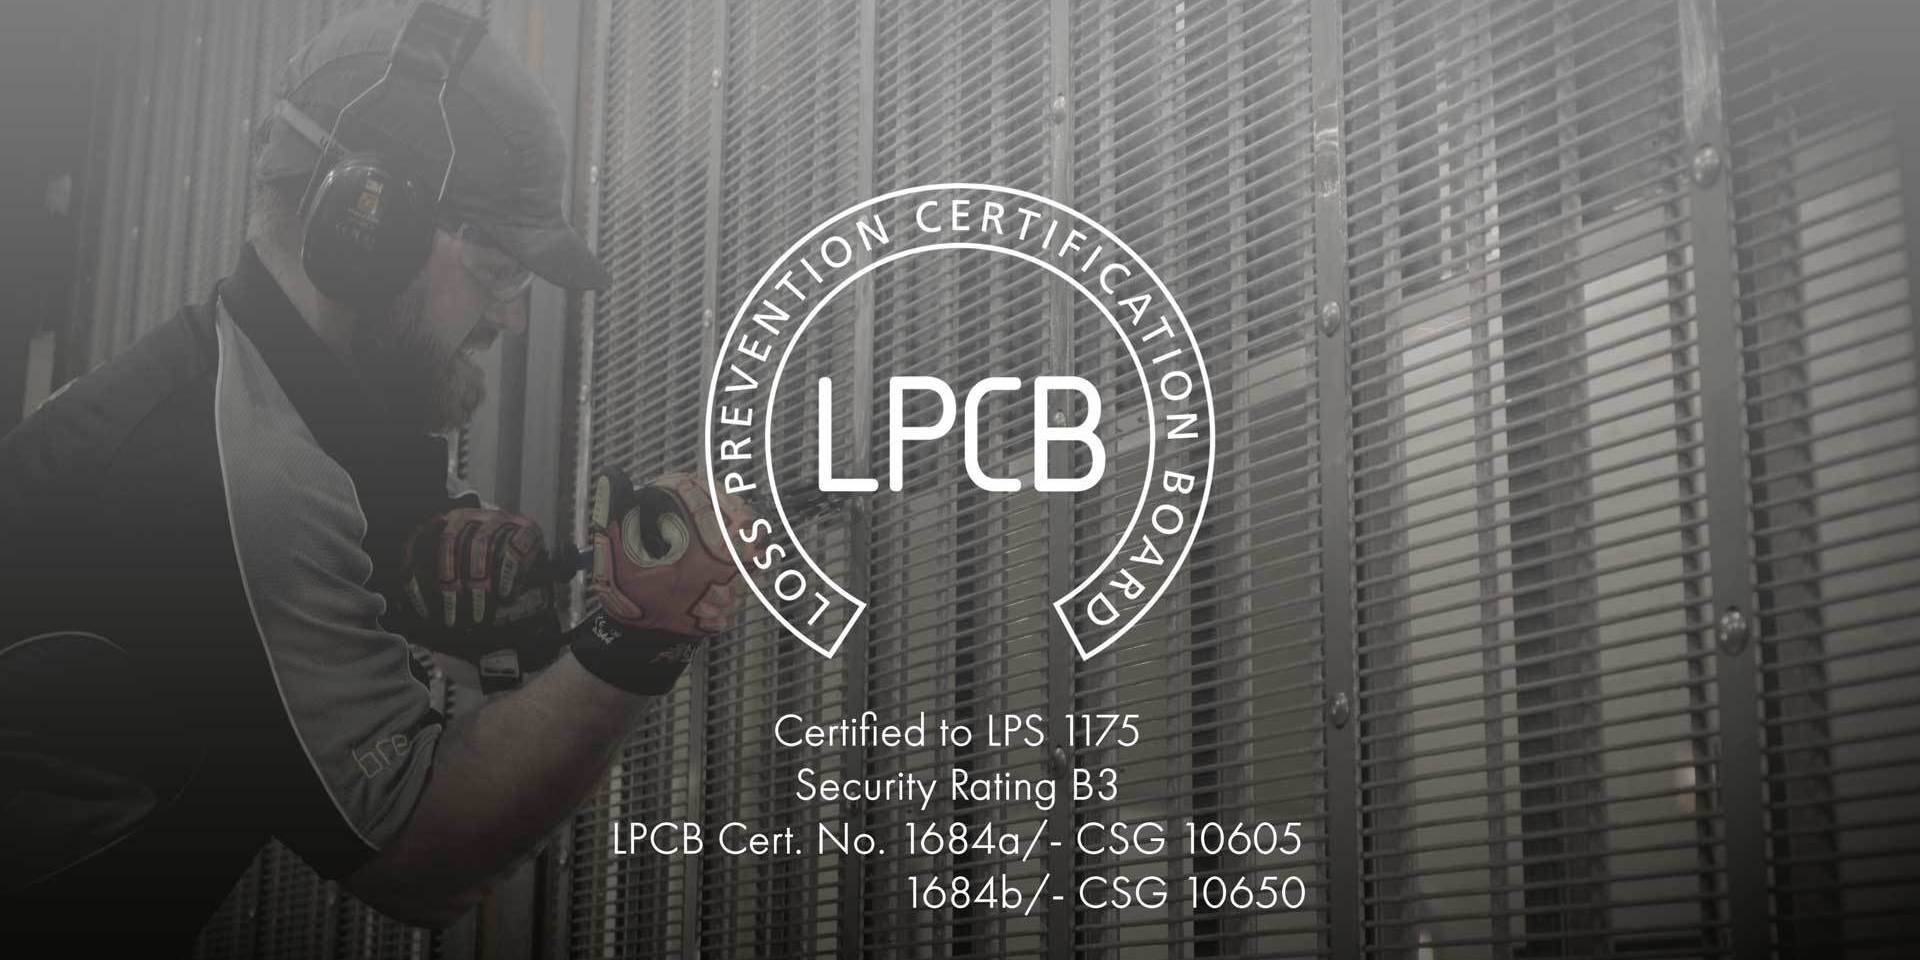 Certified to LPS 1175